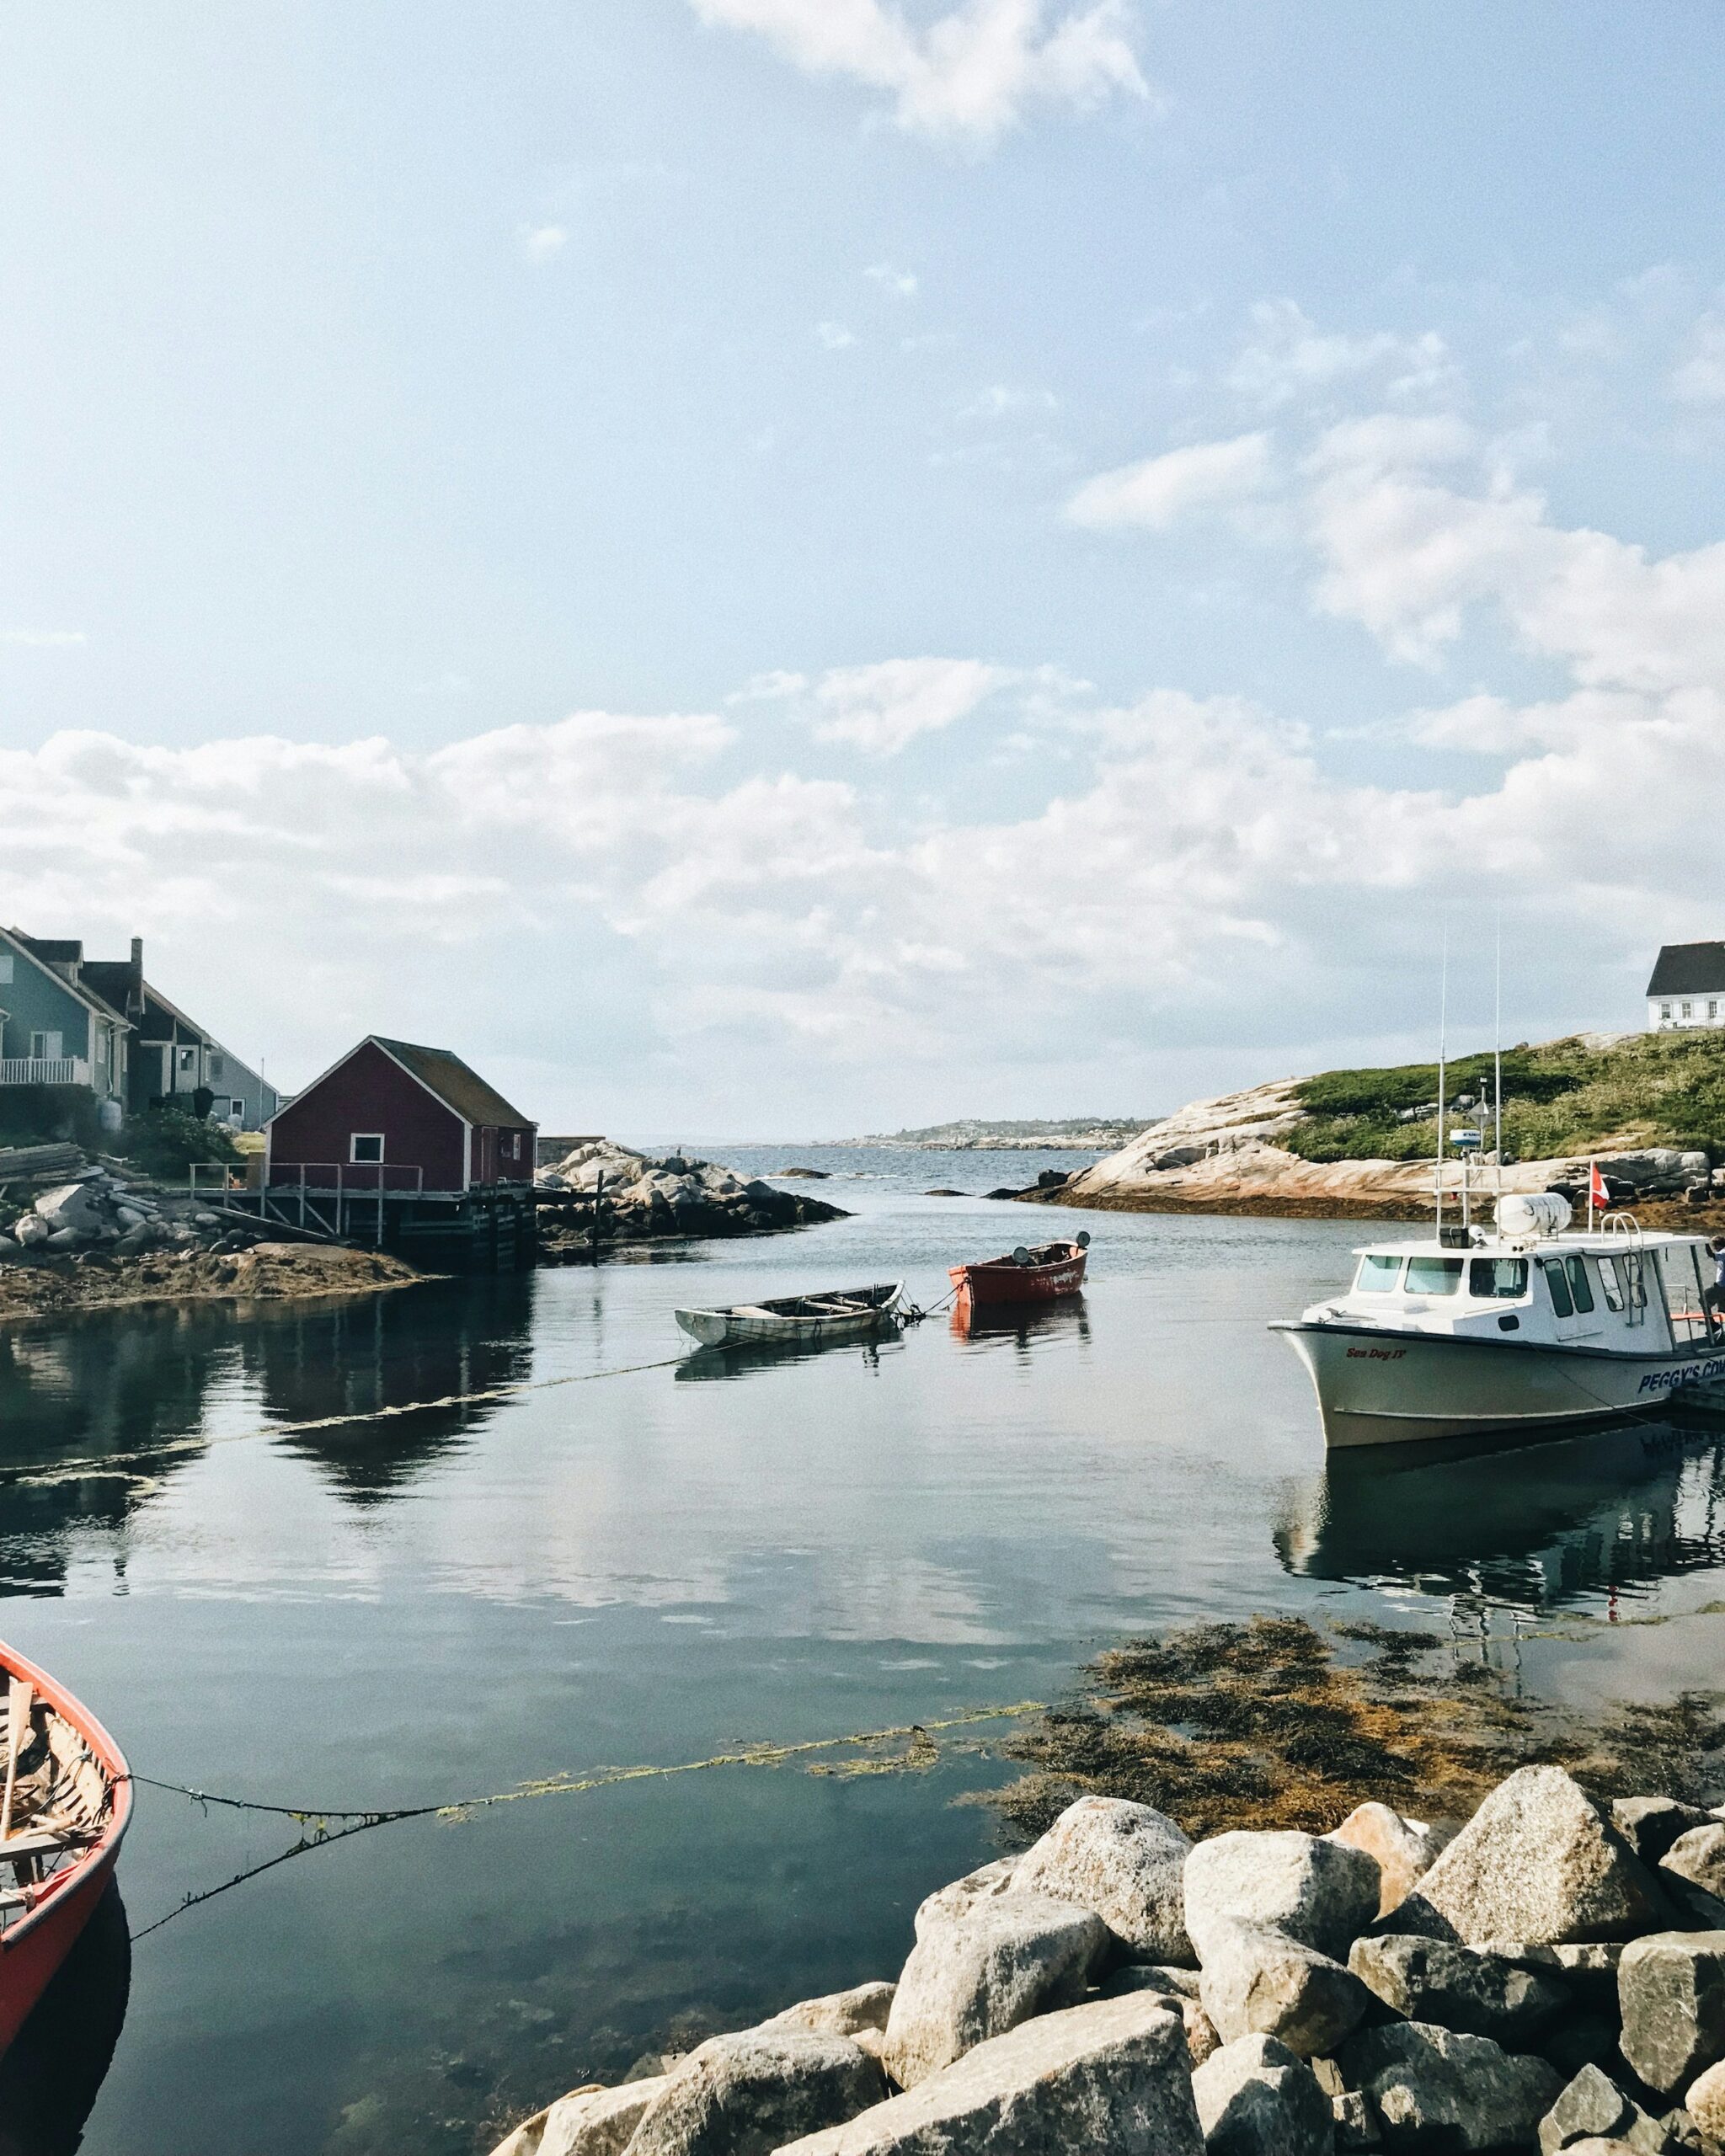 A photo from the coastline of Peggy's Cove, Nova Scotia. There are small boats in the foreground and a low mountain on the horizon line. The day is bright, with puffy clouds in the sky, and the water is calm.